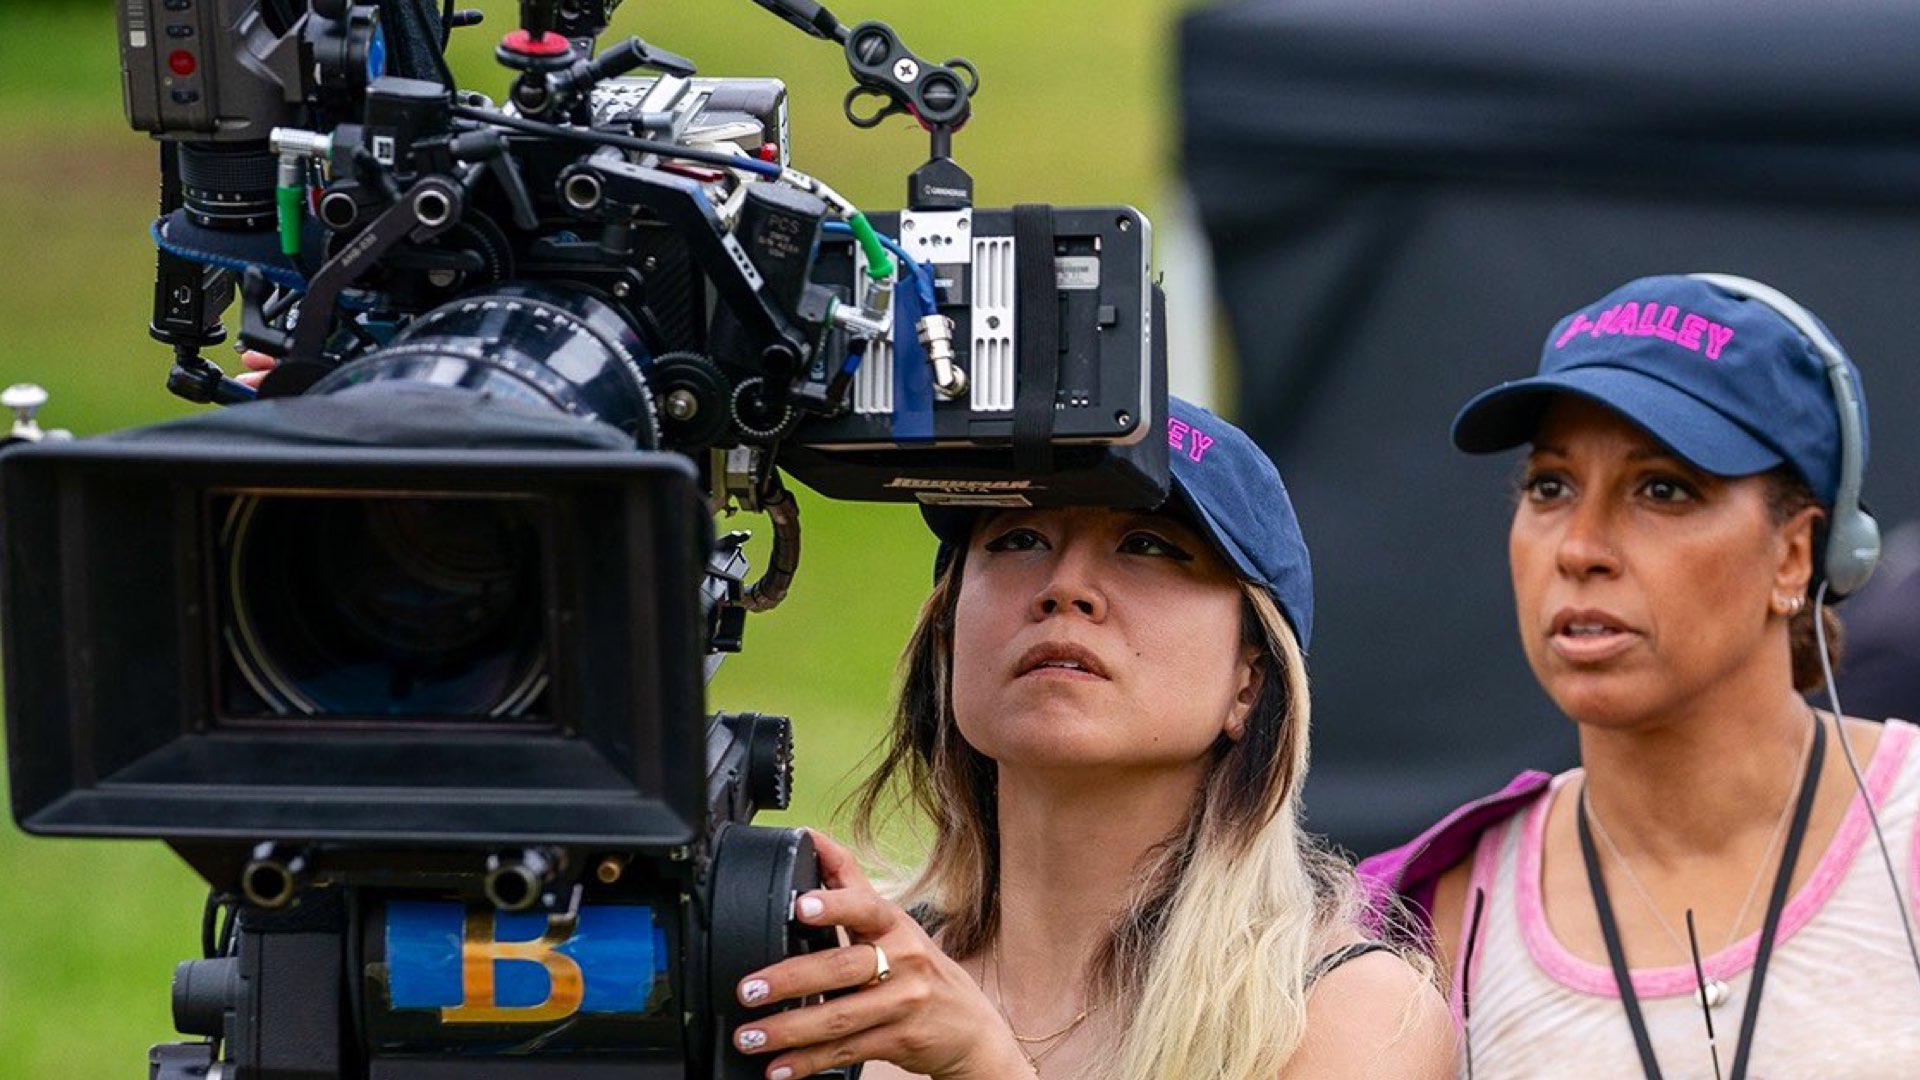 ARRI Drops Some Hints on the Next ALEXA S35 4K Camera. Picture: DP & Camera/Steadicam Operator:Janice Mini (left) and Director:Millicent Shelton (right). Credit: ARRI (from International Women's Day 2021),